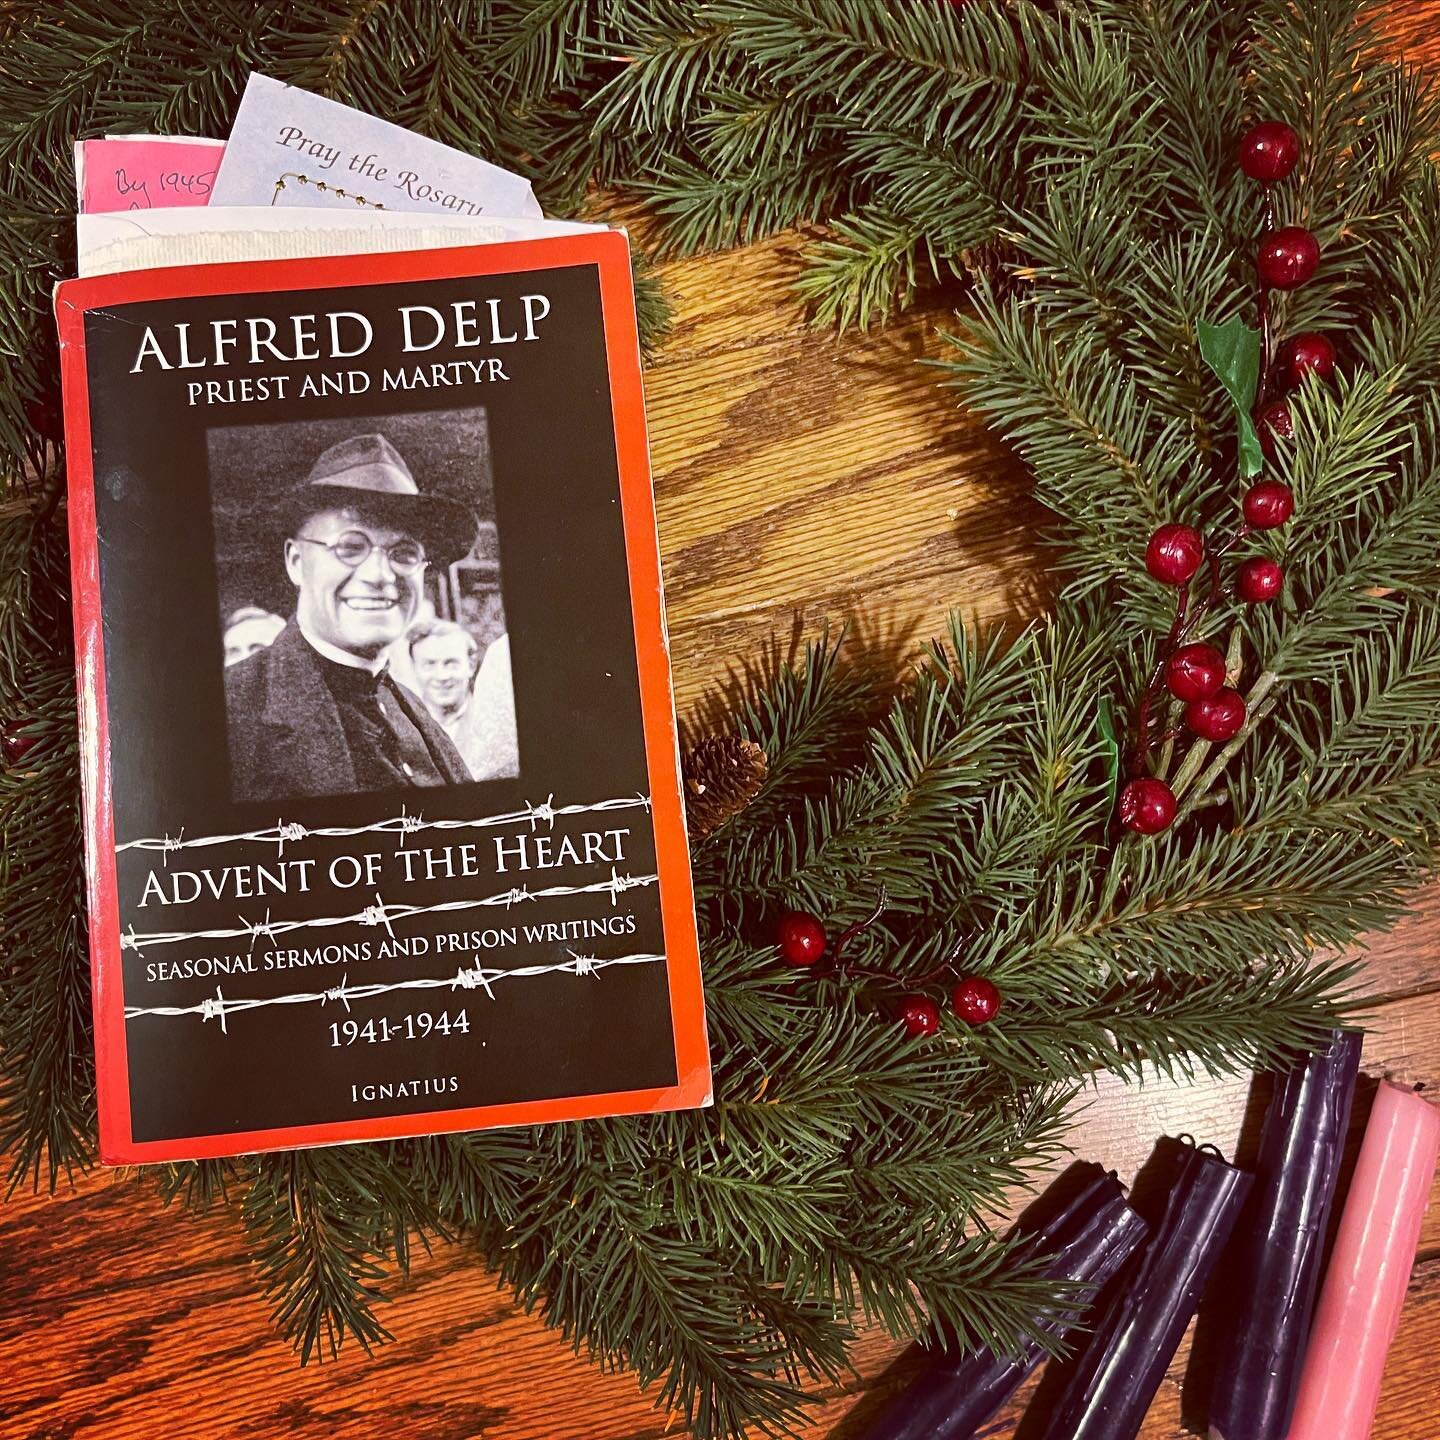 &ldquo;More, and on a deeper level than before, we really know this time that all of life is Advent.&rdquo;

- Alfred Delp, S.J.
Tegel Prison, December 5, 1944

This is my favorite Advent book&hellip; that stays open all year long. Since 2020, I&rsqu